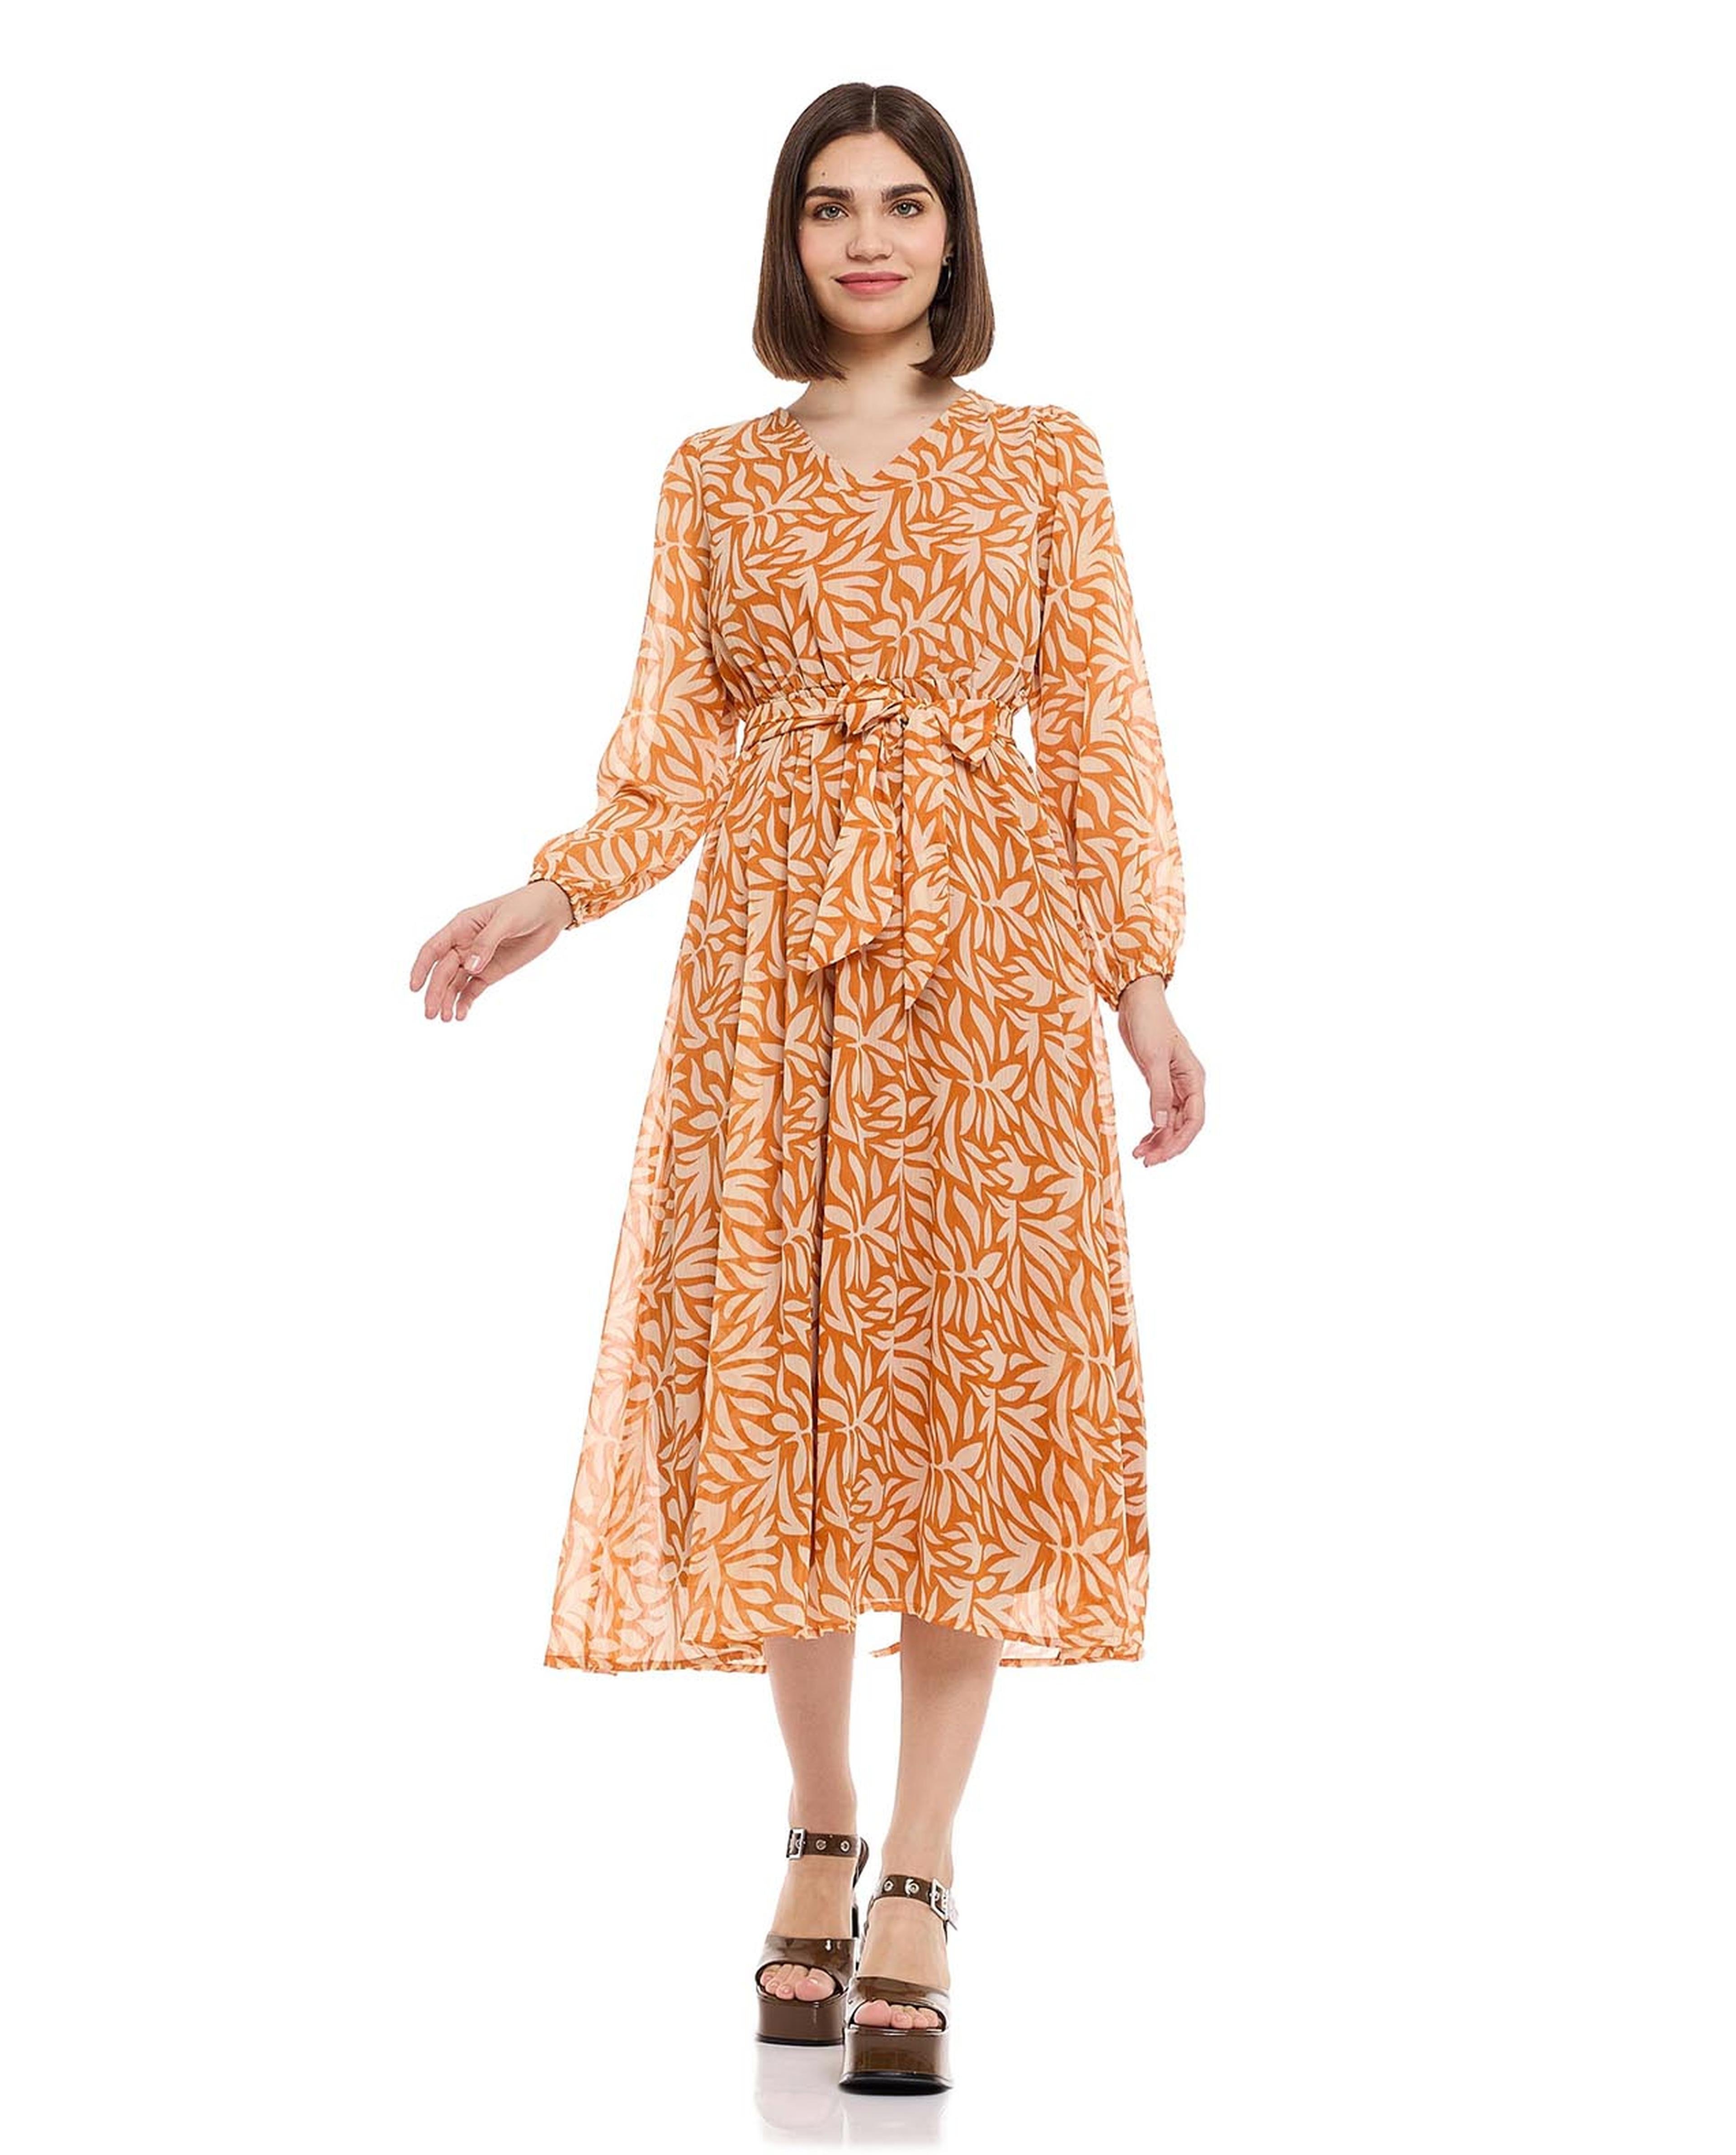 Patterned Midi Dress with V-Neck and Long Sleeves